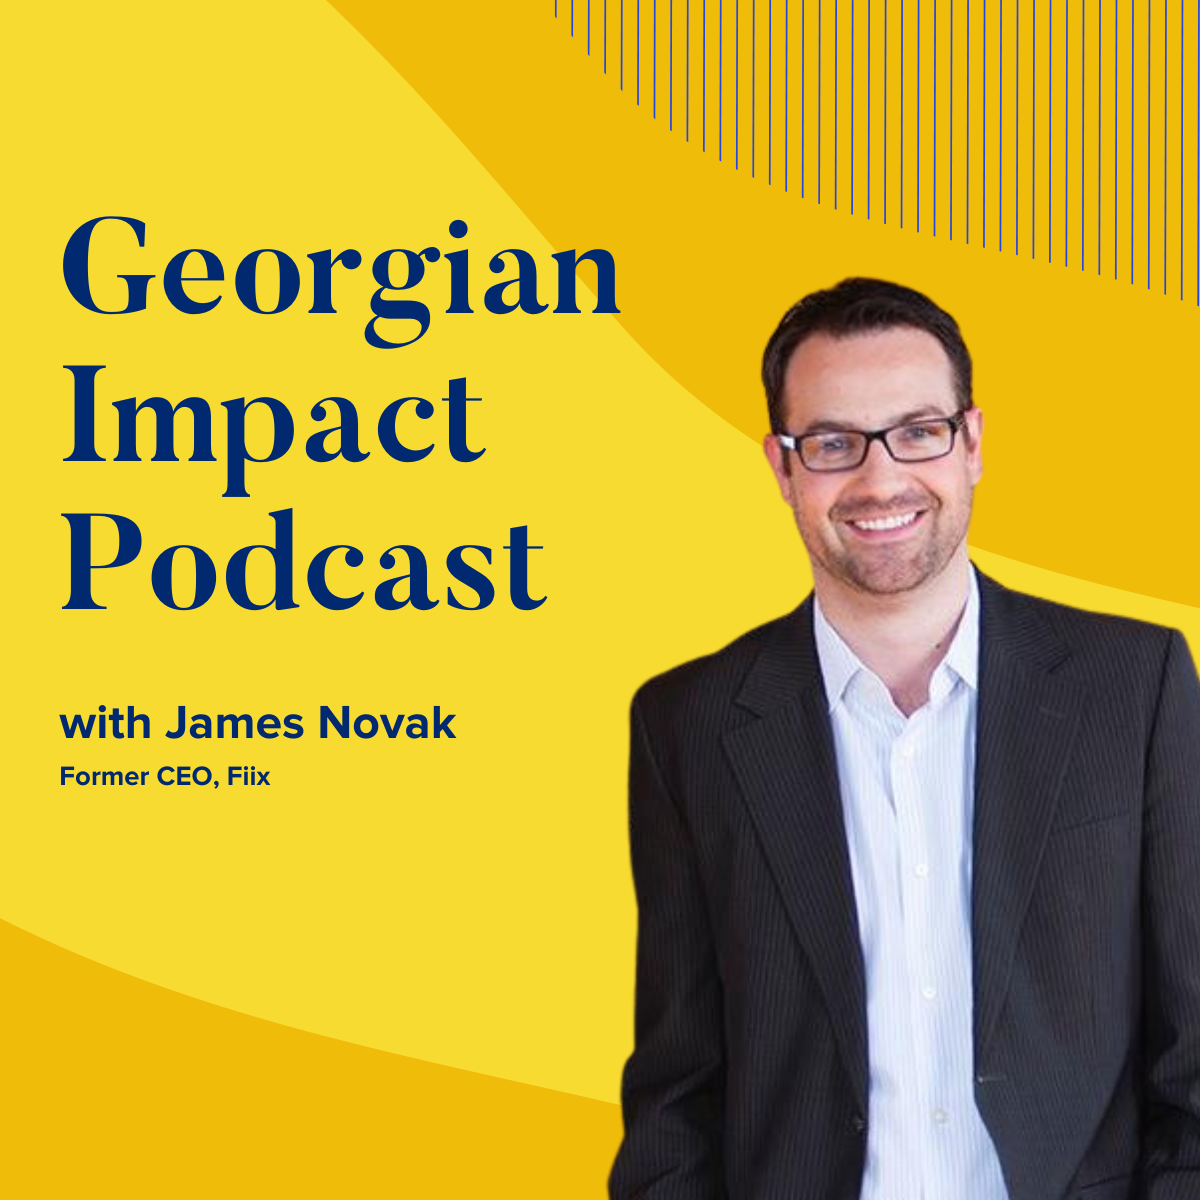 Georgian impact podcast graphic with a photo of James Novak, former CEO of Flix